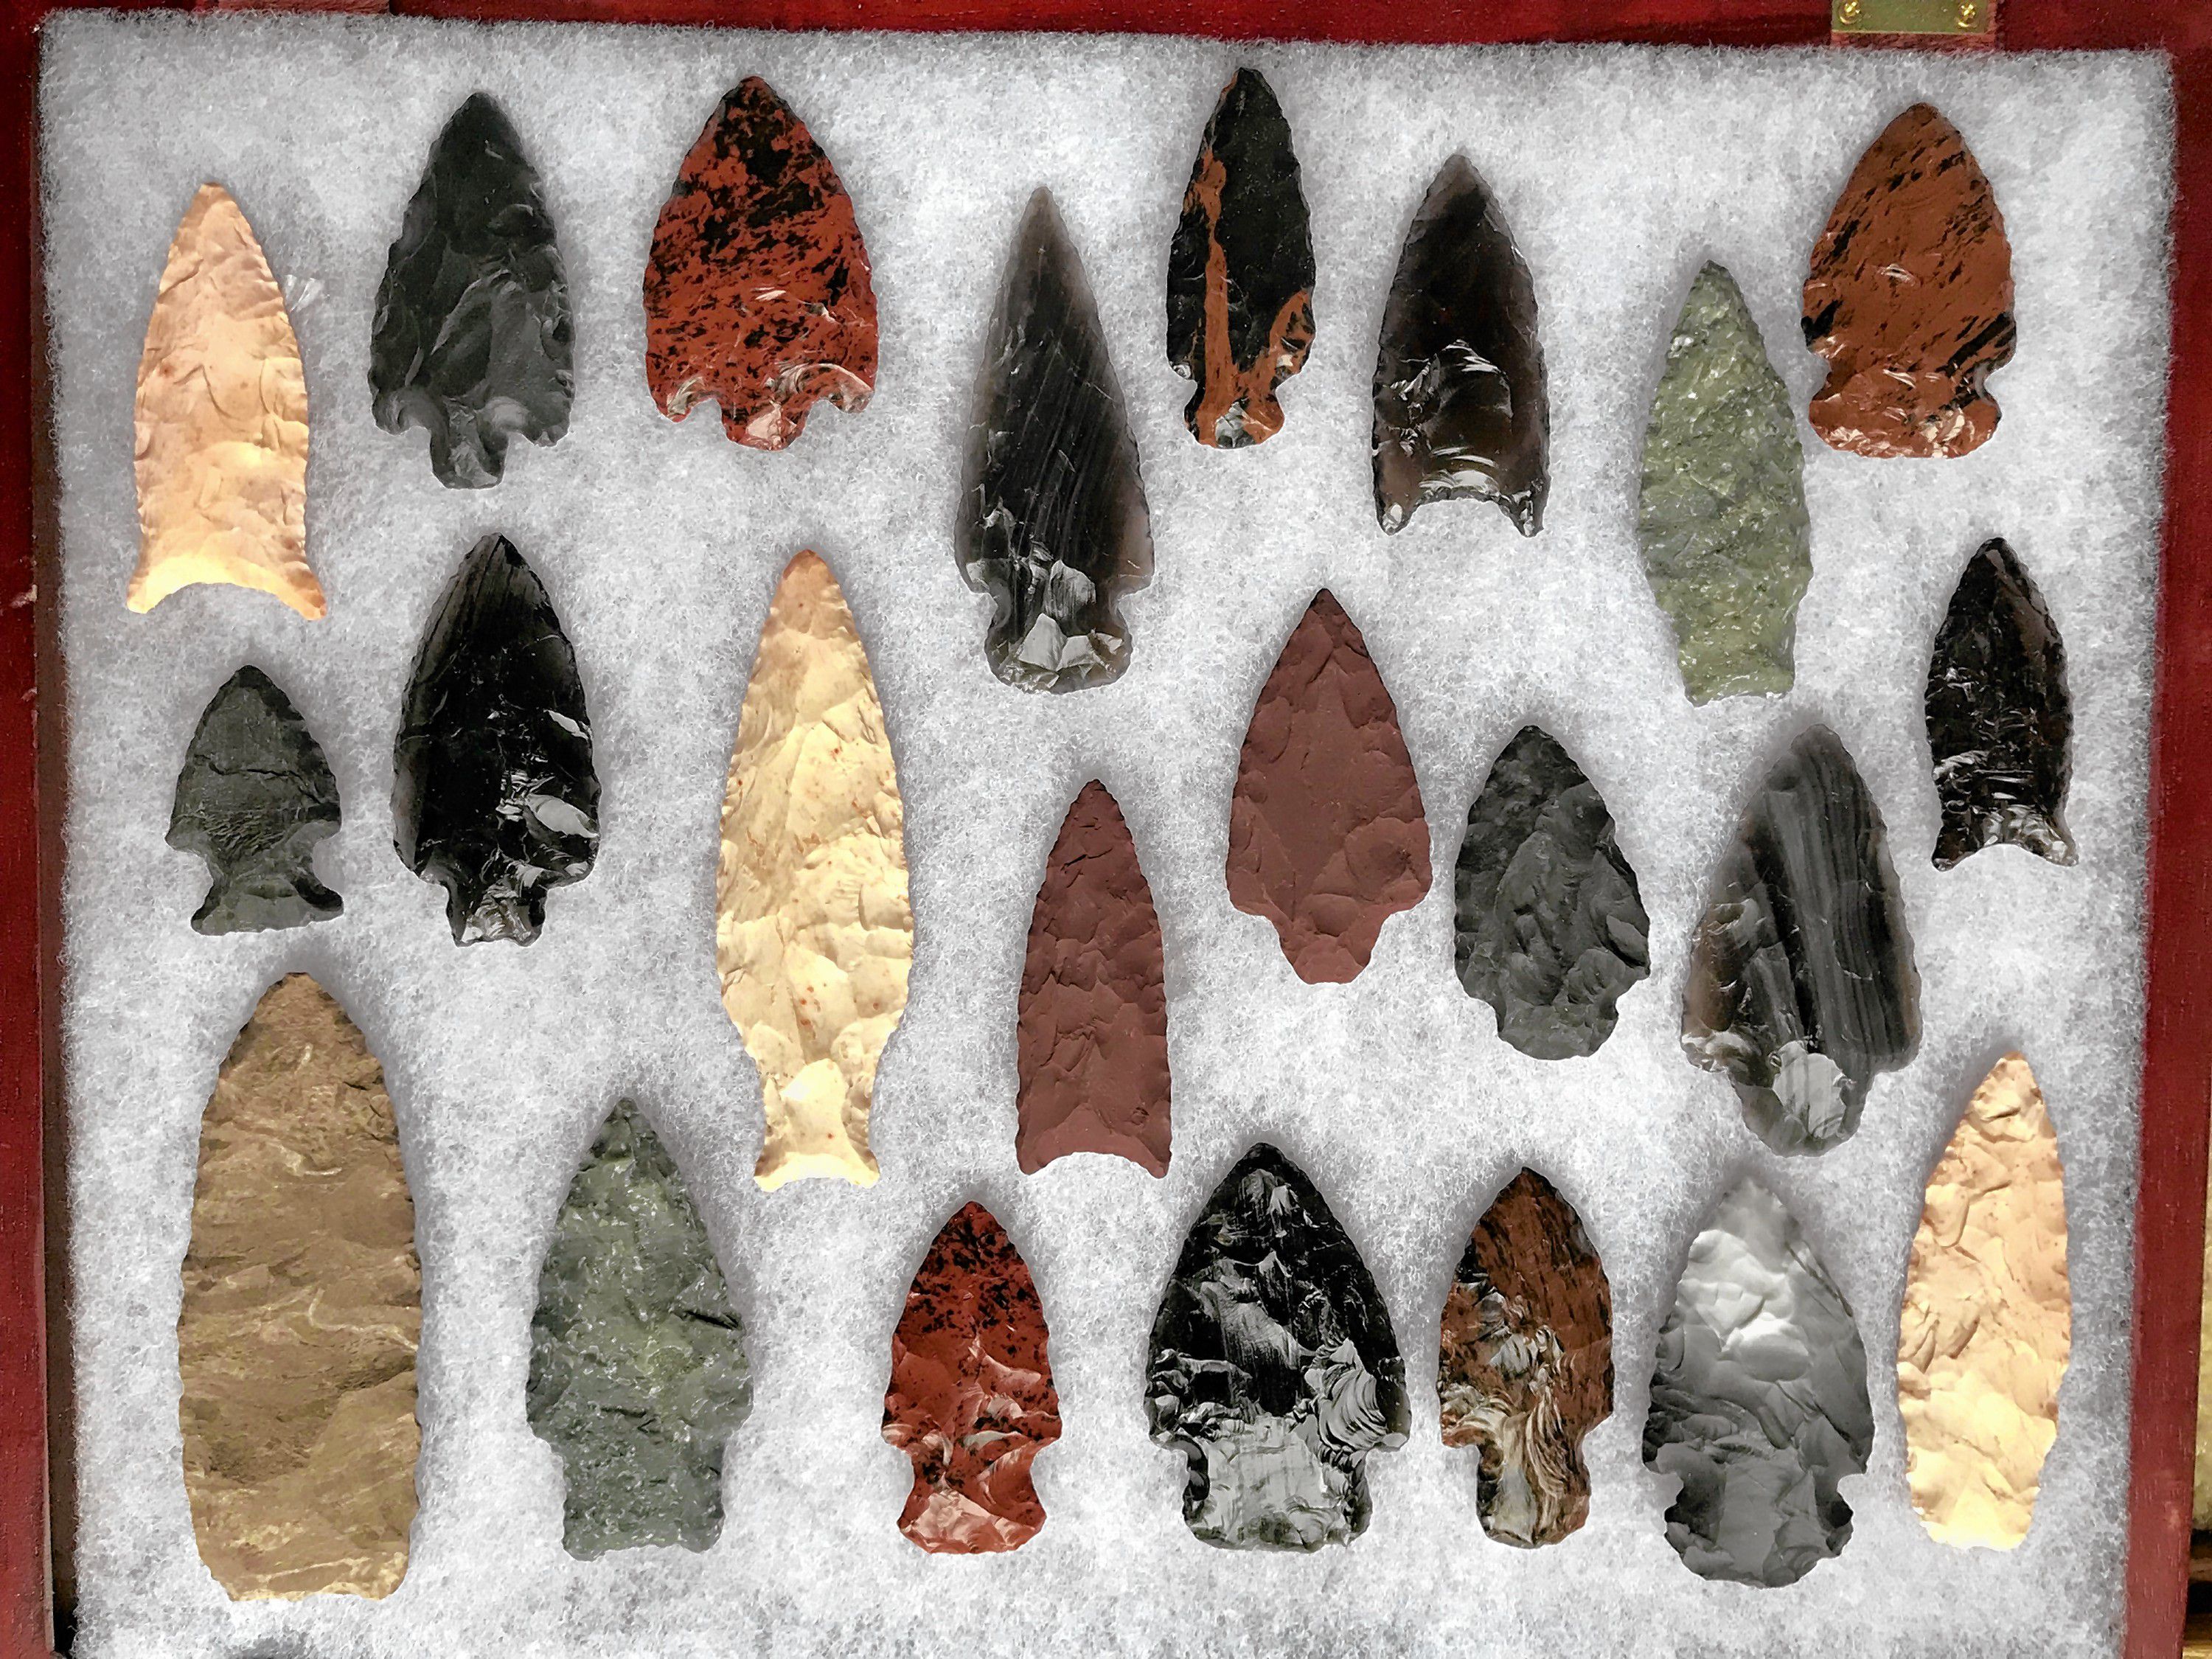 KVK Crystals Lot of 25 Indian Arrowheads Agate Chert Flint New Project Points 1 1/2\ L 